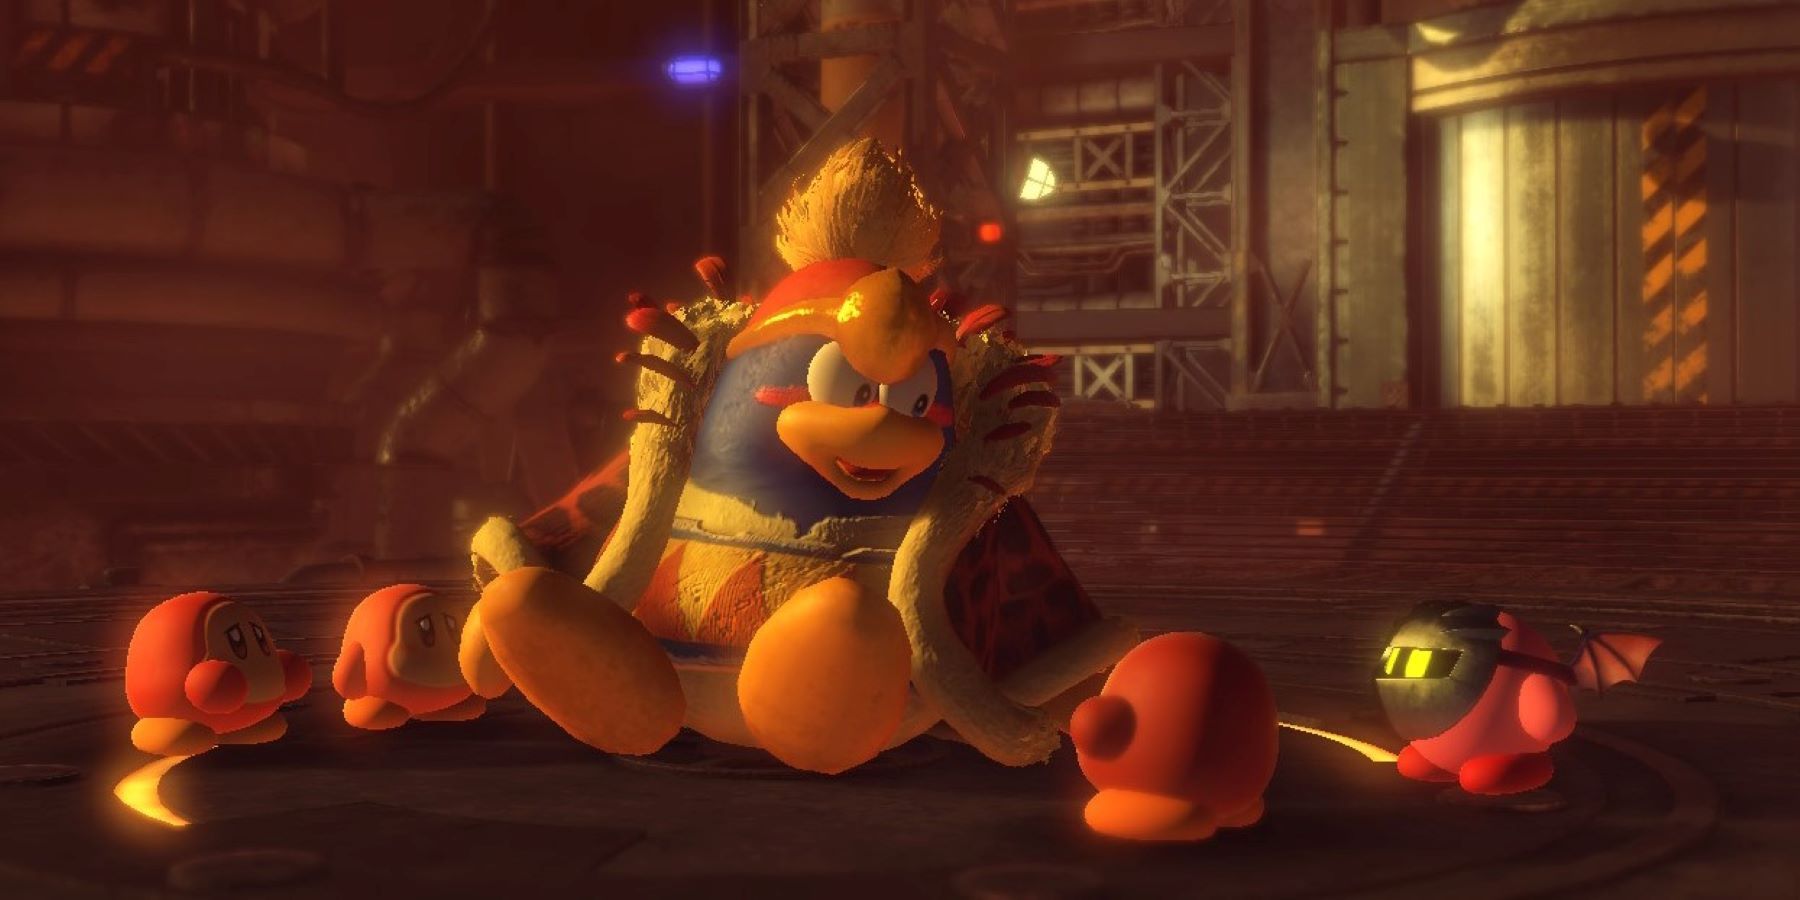 King Dedede reawakening with Kirby and some Waddle Dees after his Forgo Dedede boss battle in Kirby and the Forgotten Land